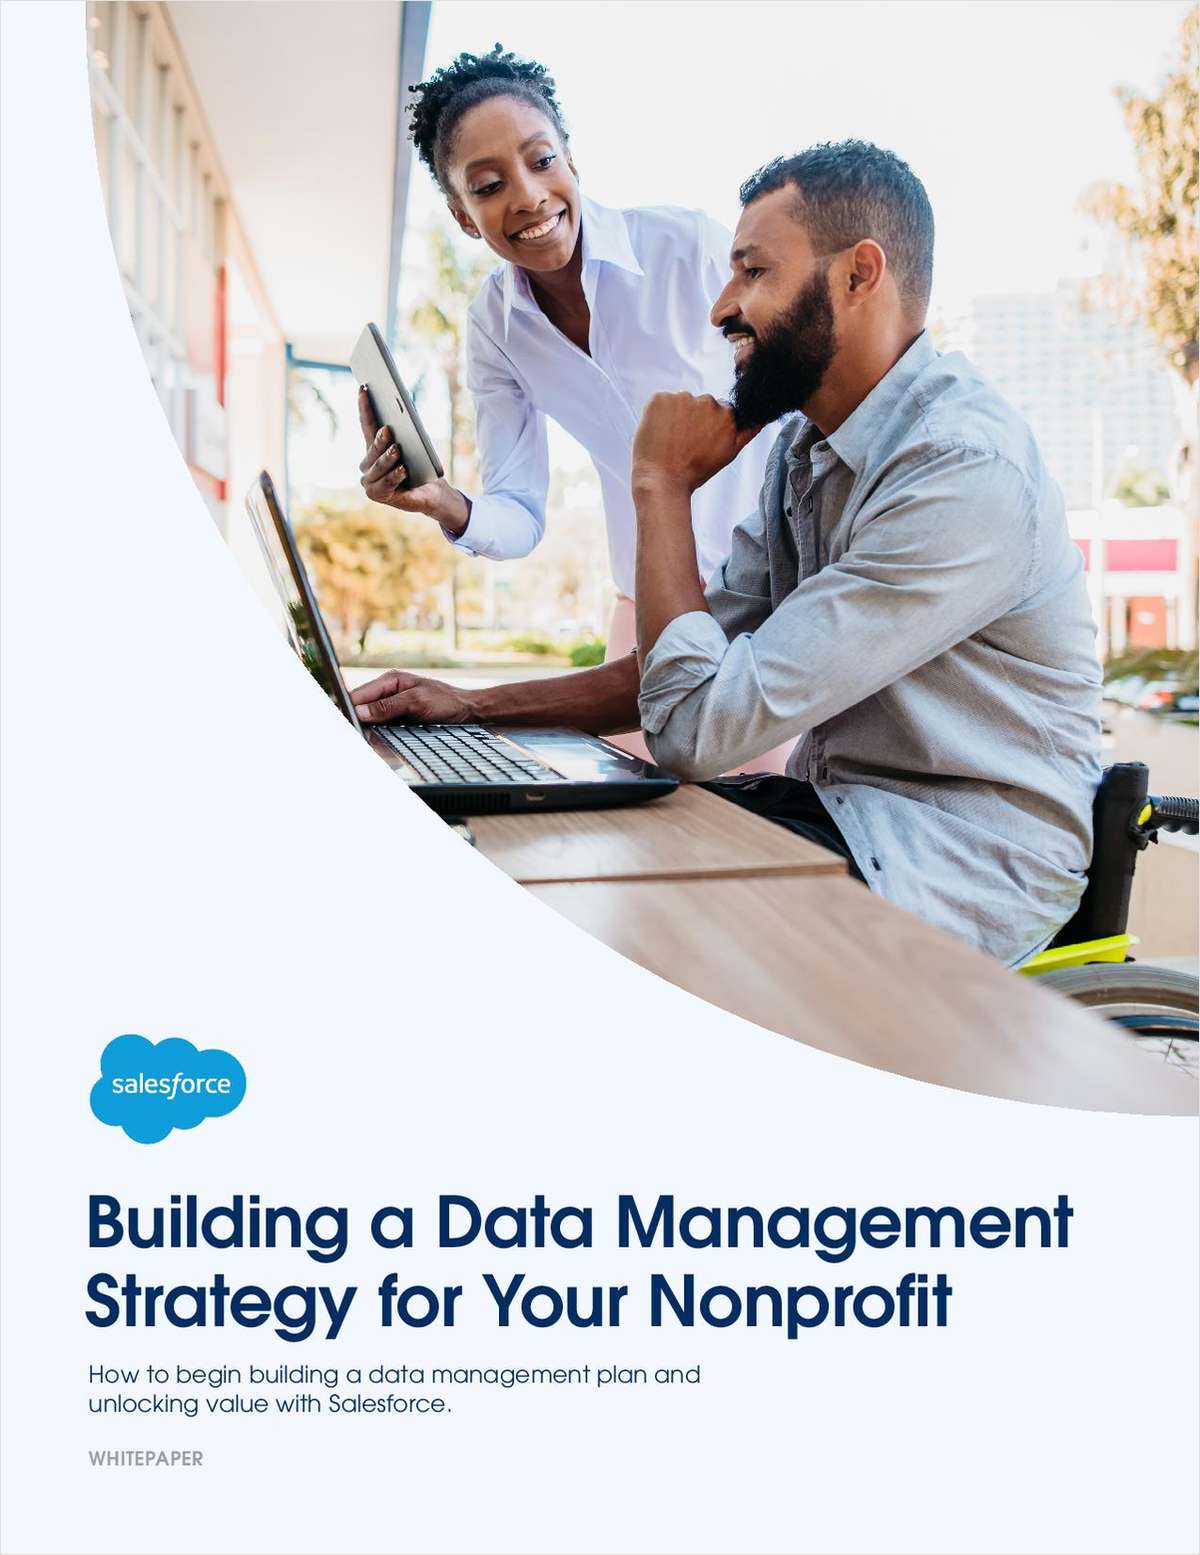 Build a Data Management Strategy for Your Nonprofit